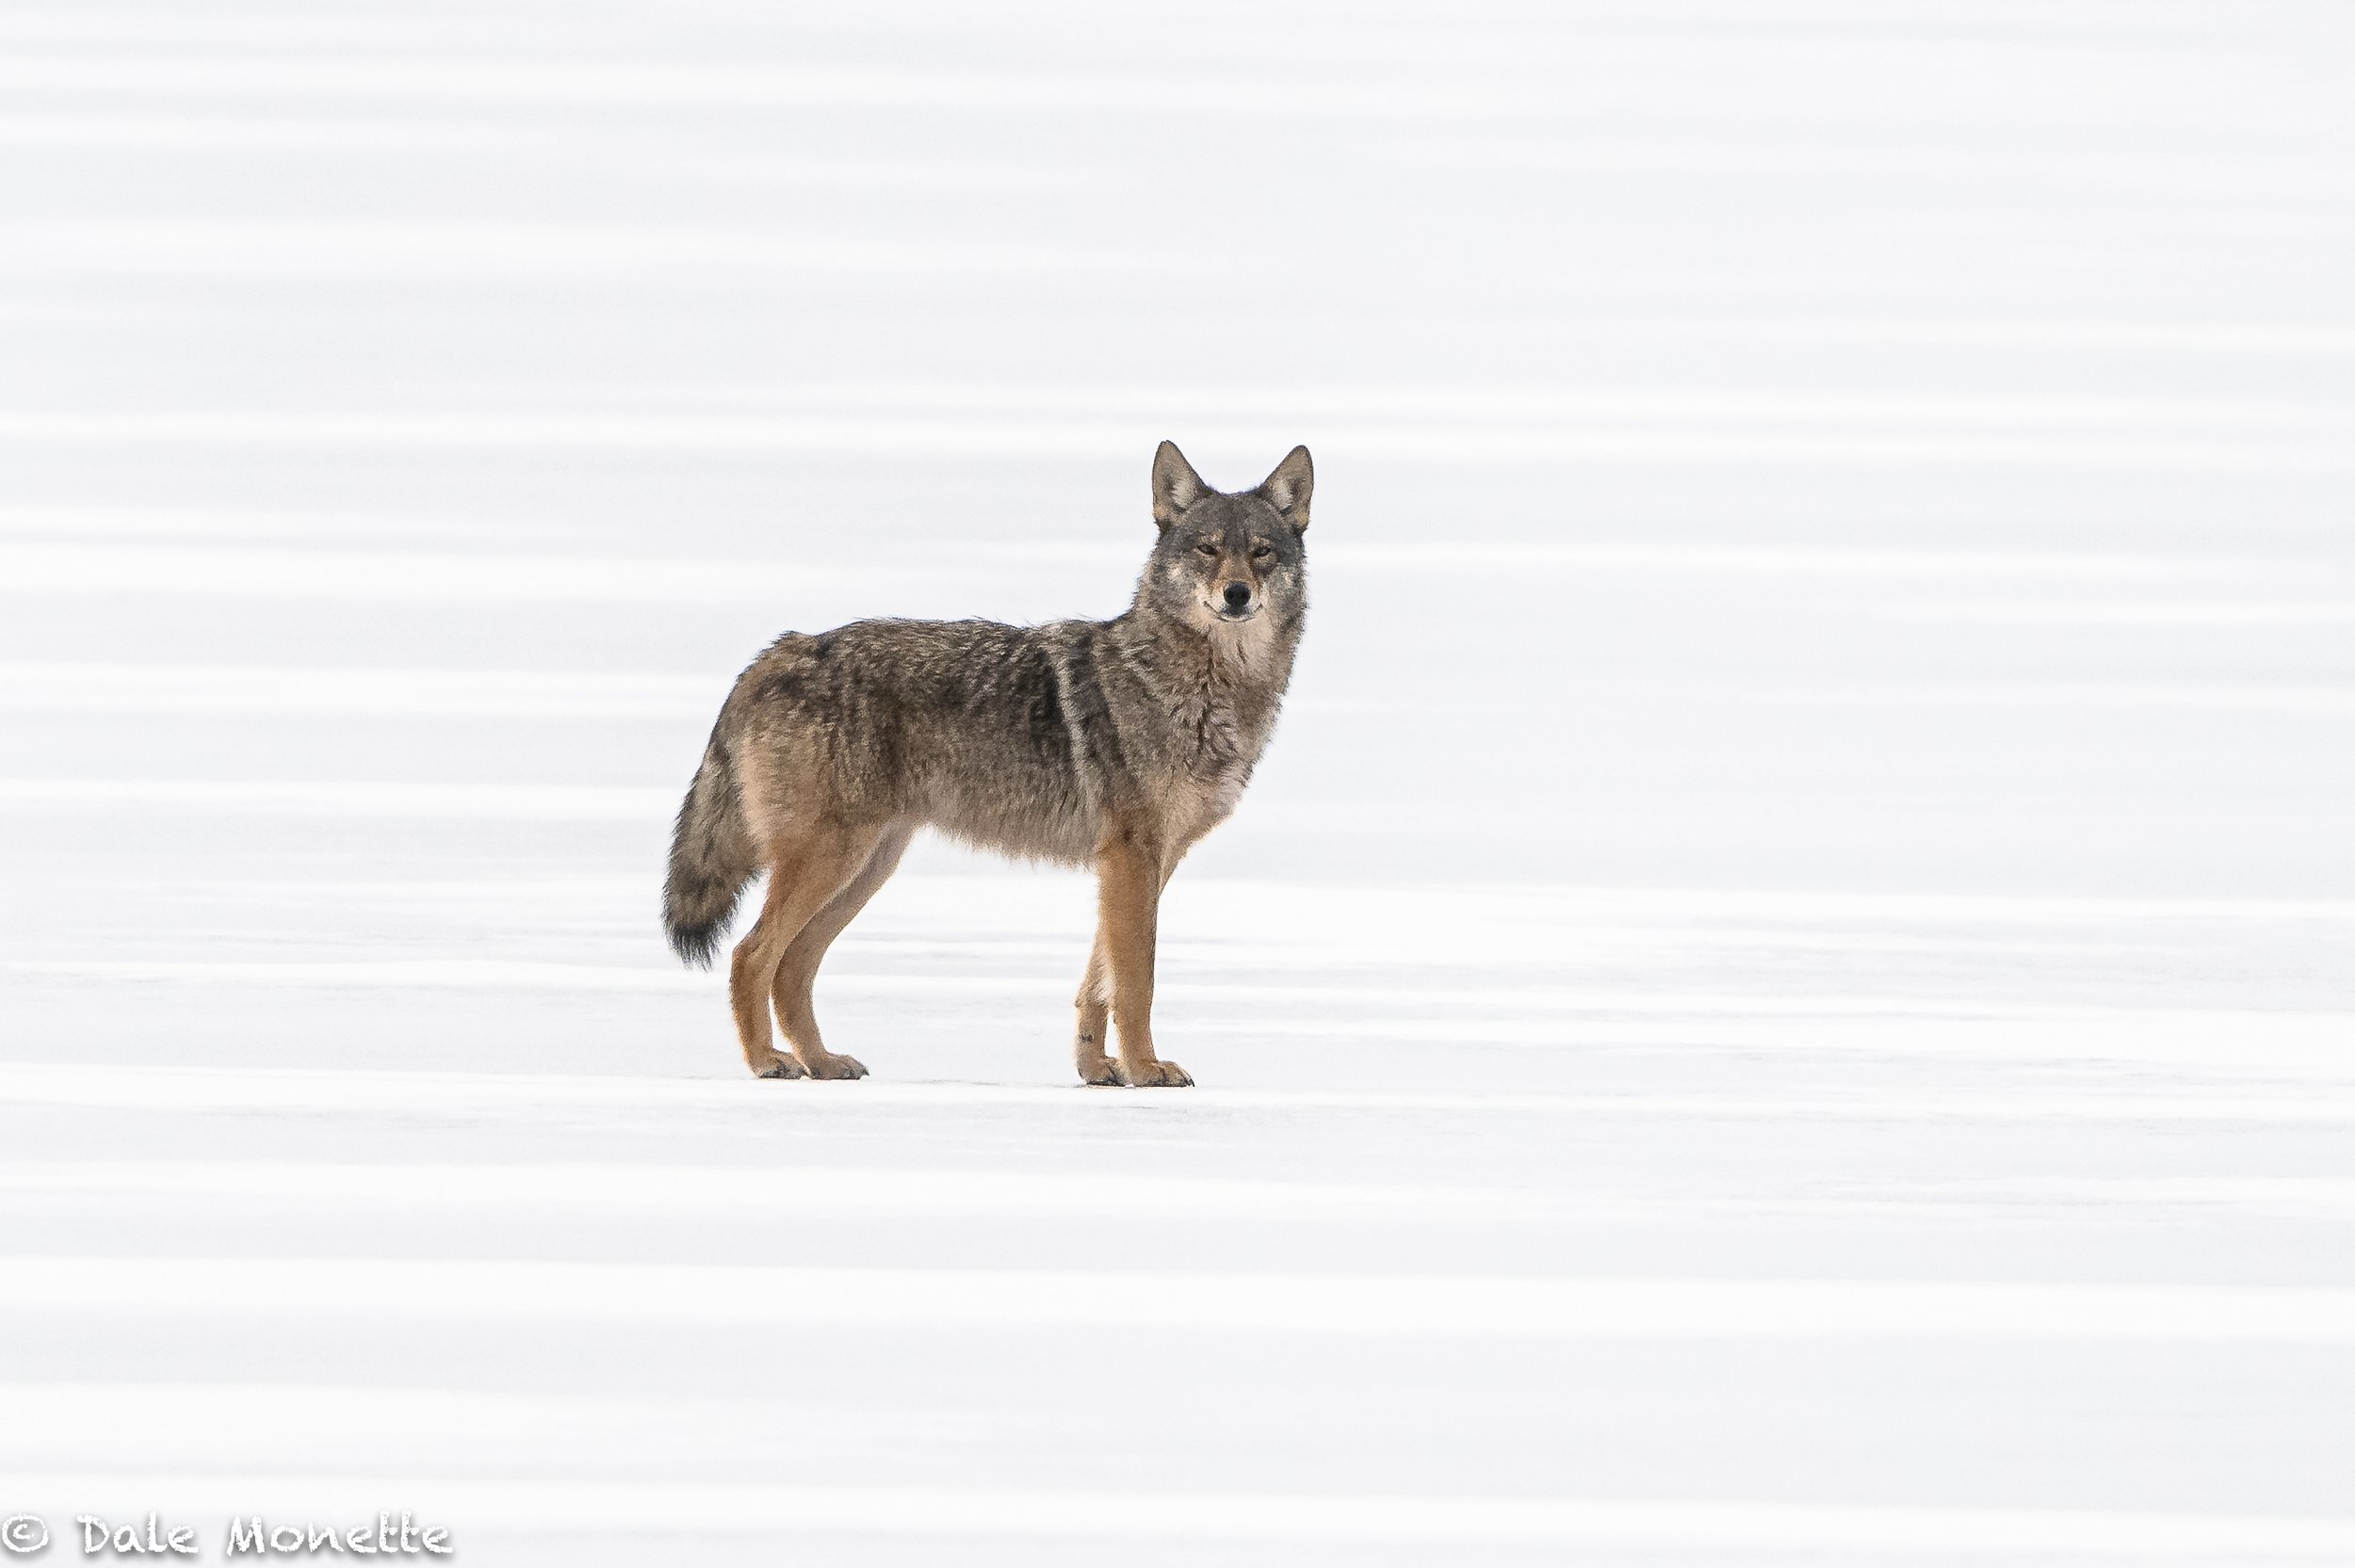   Three coyotes on the Quabbin ice last week. Here’s one that got a whiff of my. scent because the wind was blowing right towards them as they crossed the ice.  A wild look if I’ve ever seen one.  